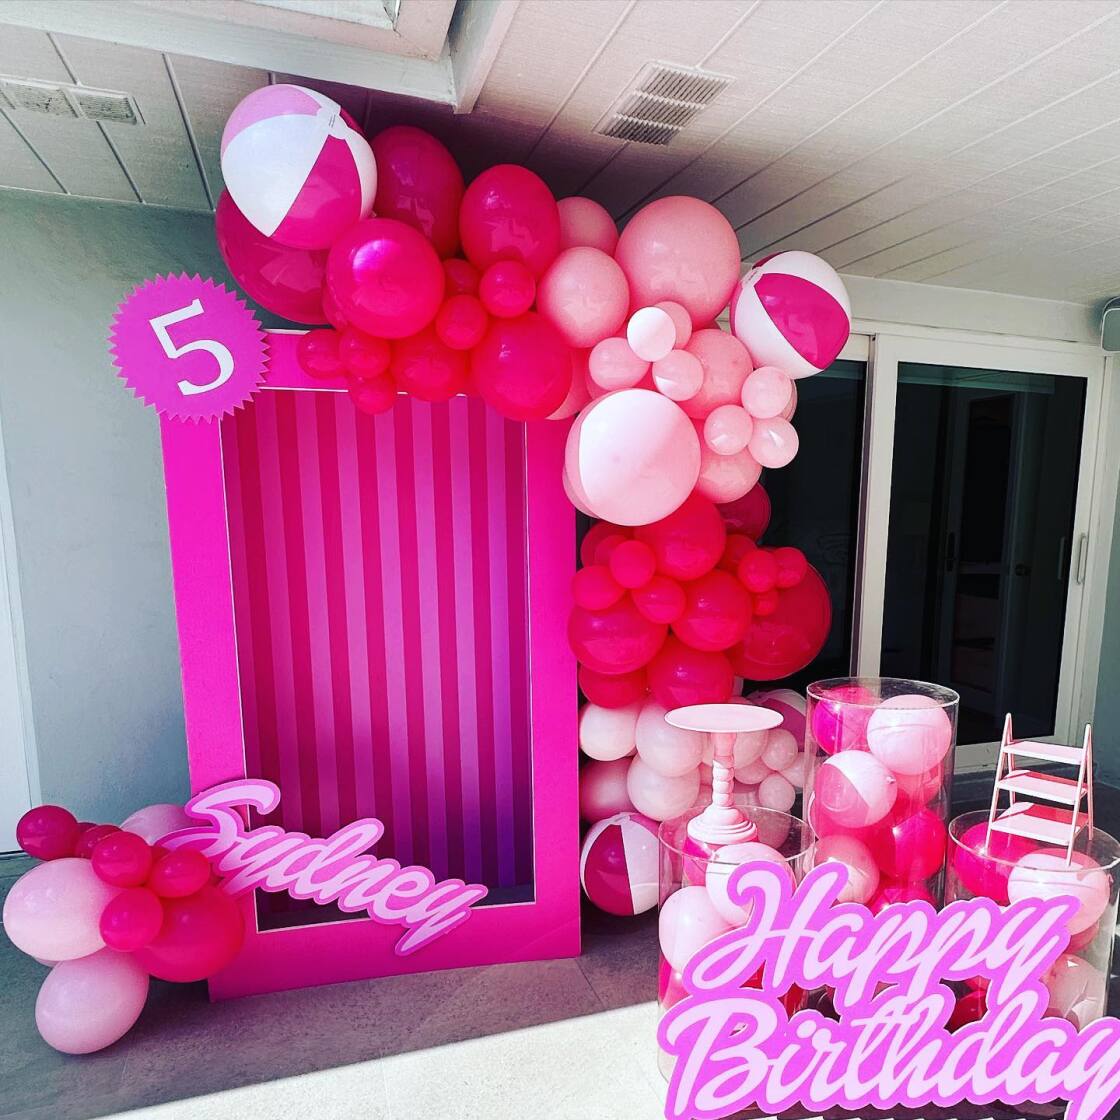 Balloon Decorations in Melbourne & Sydney - All Fun Parties